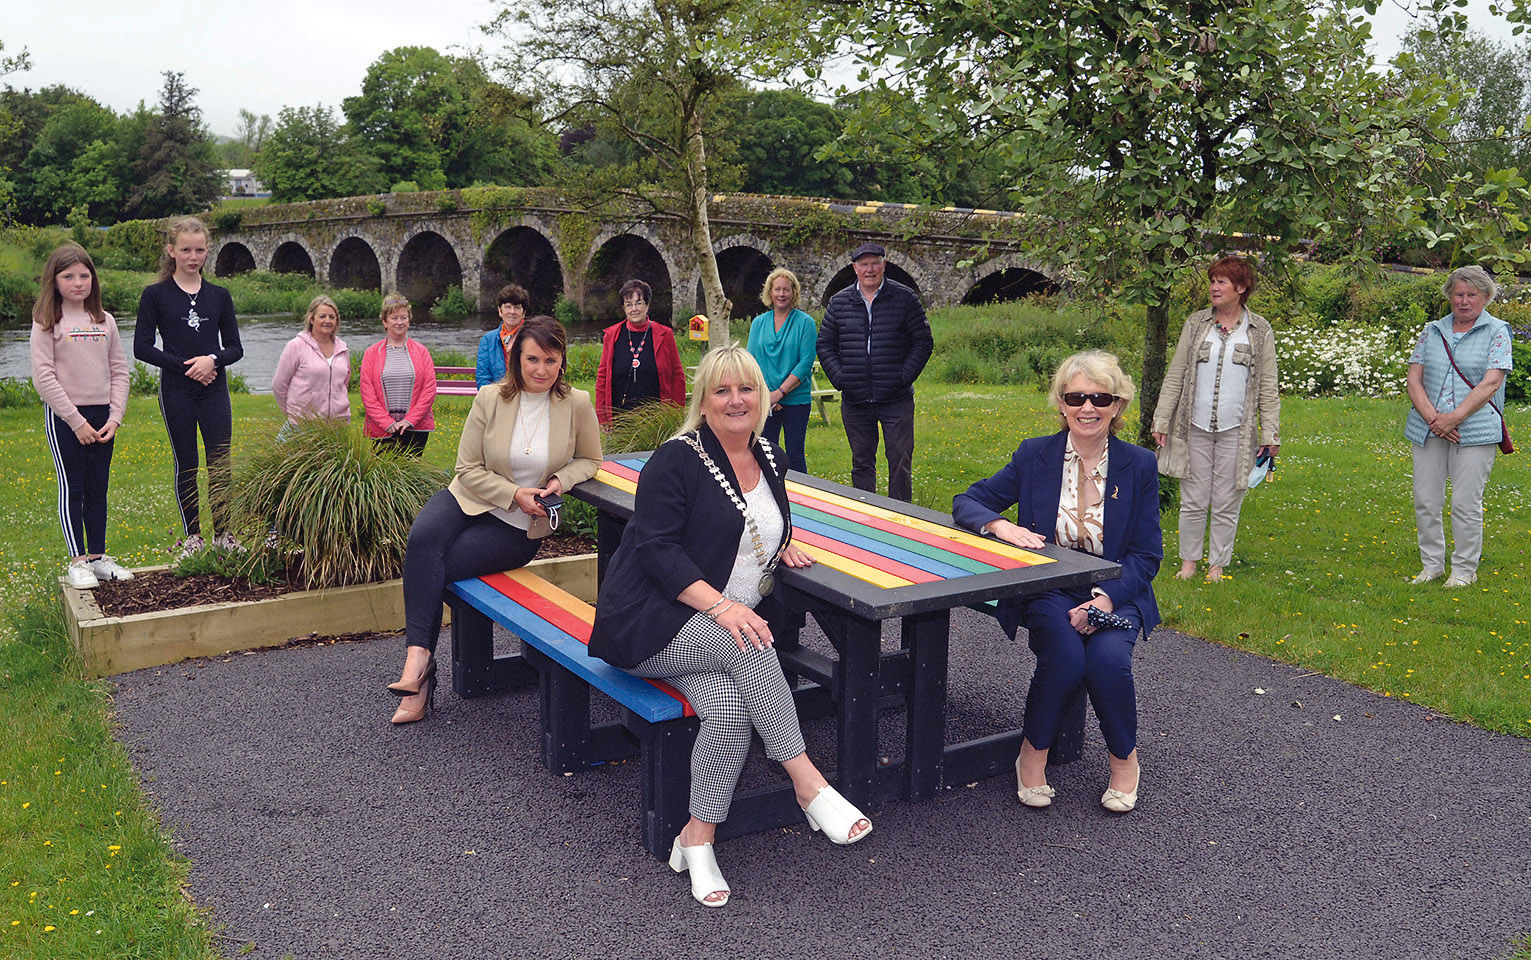 Heritage Trail launched for twin villages of Ballineen and Enniskeane